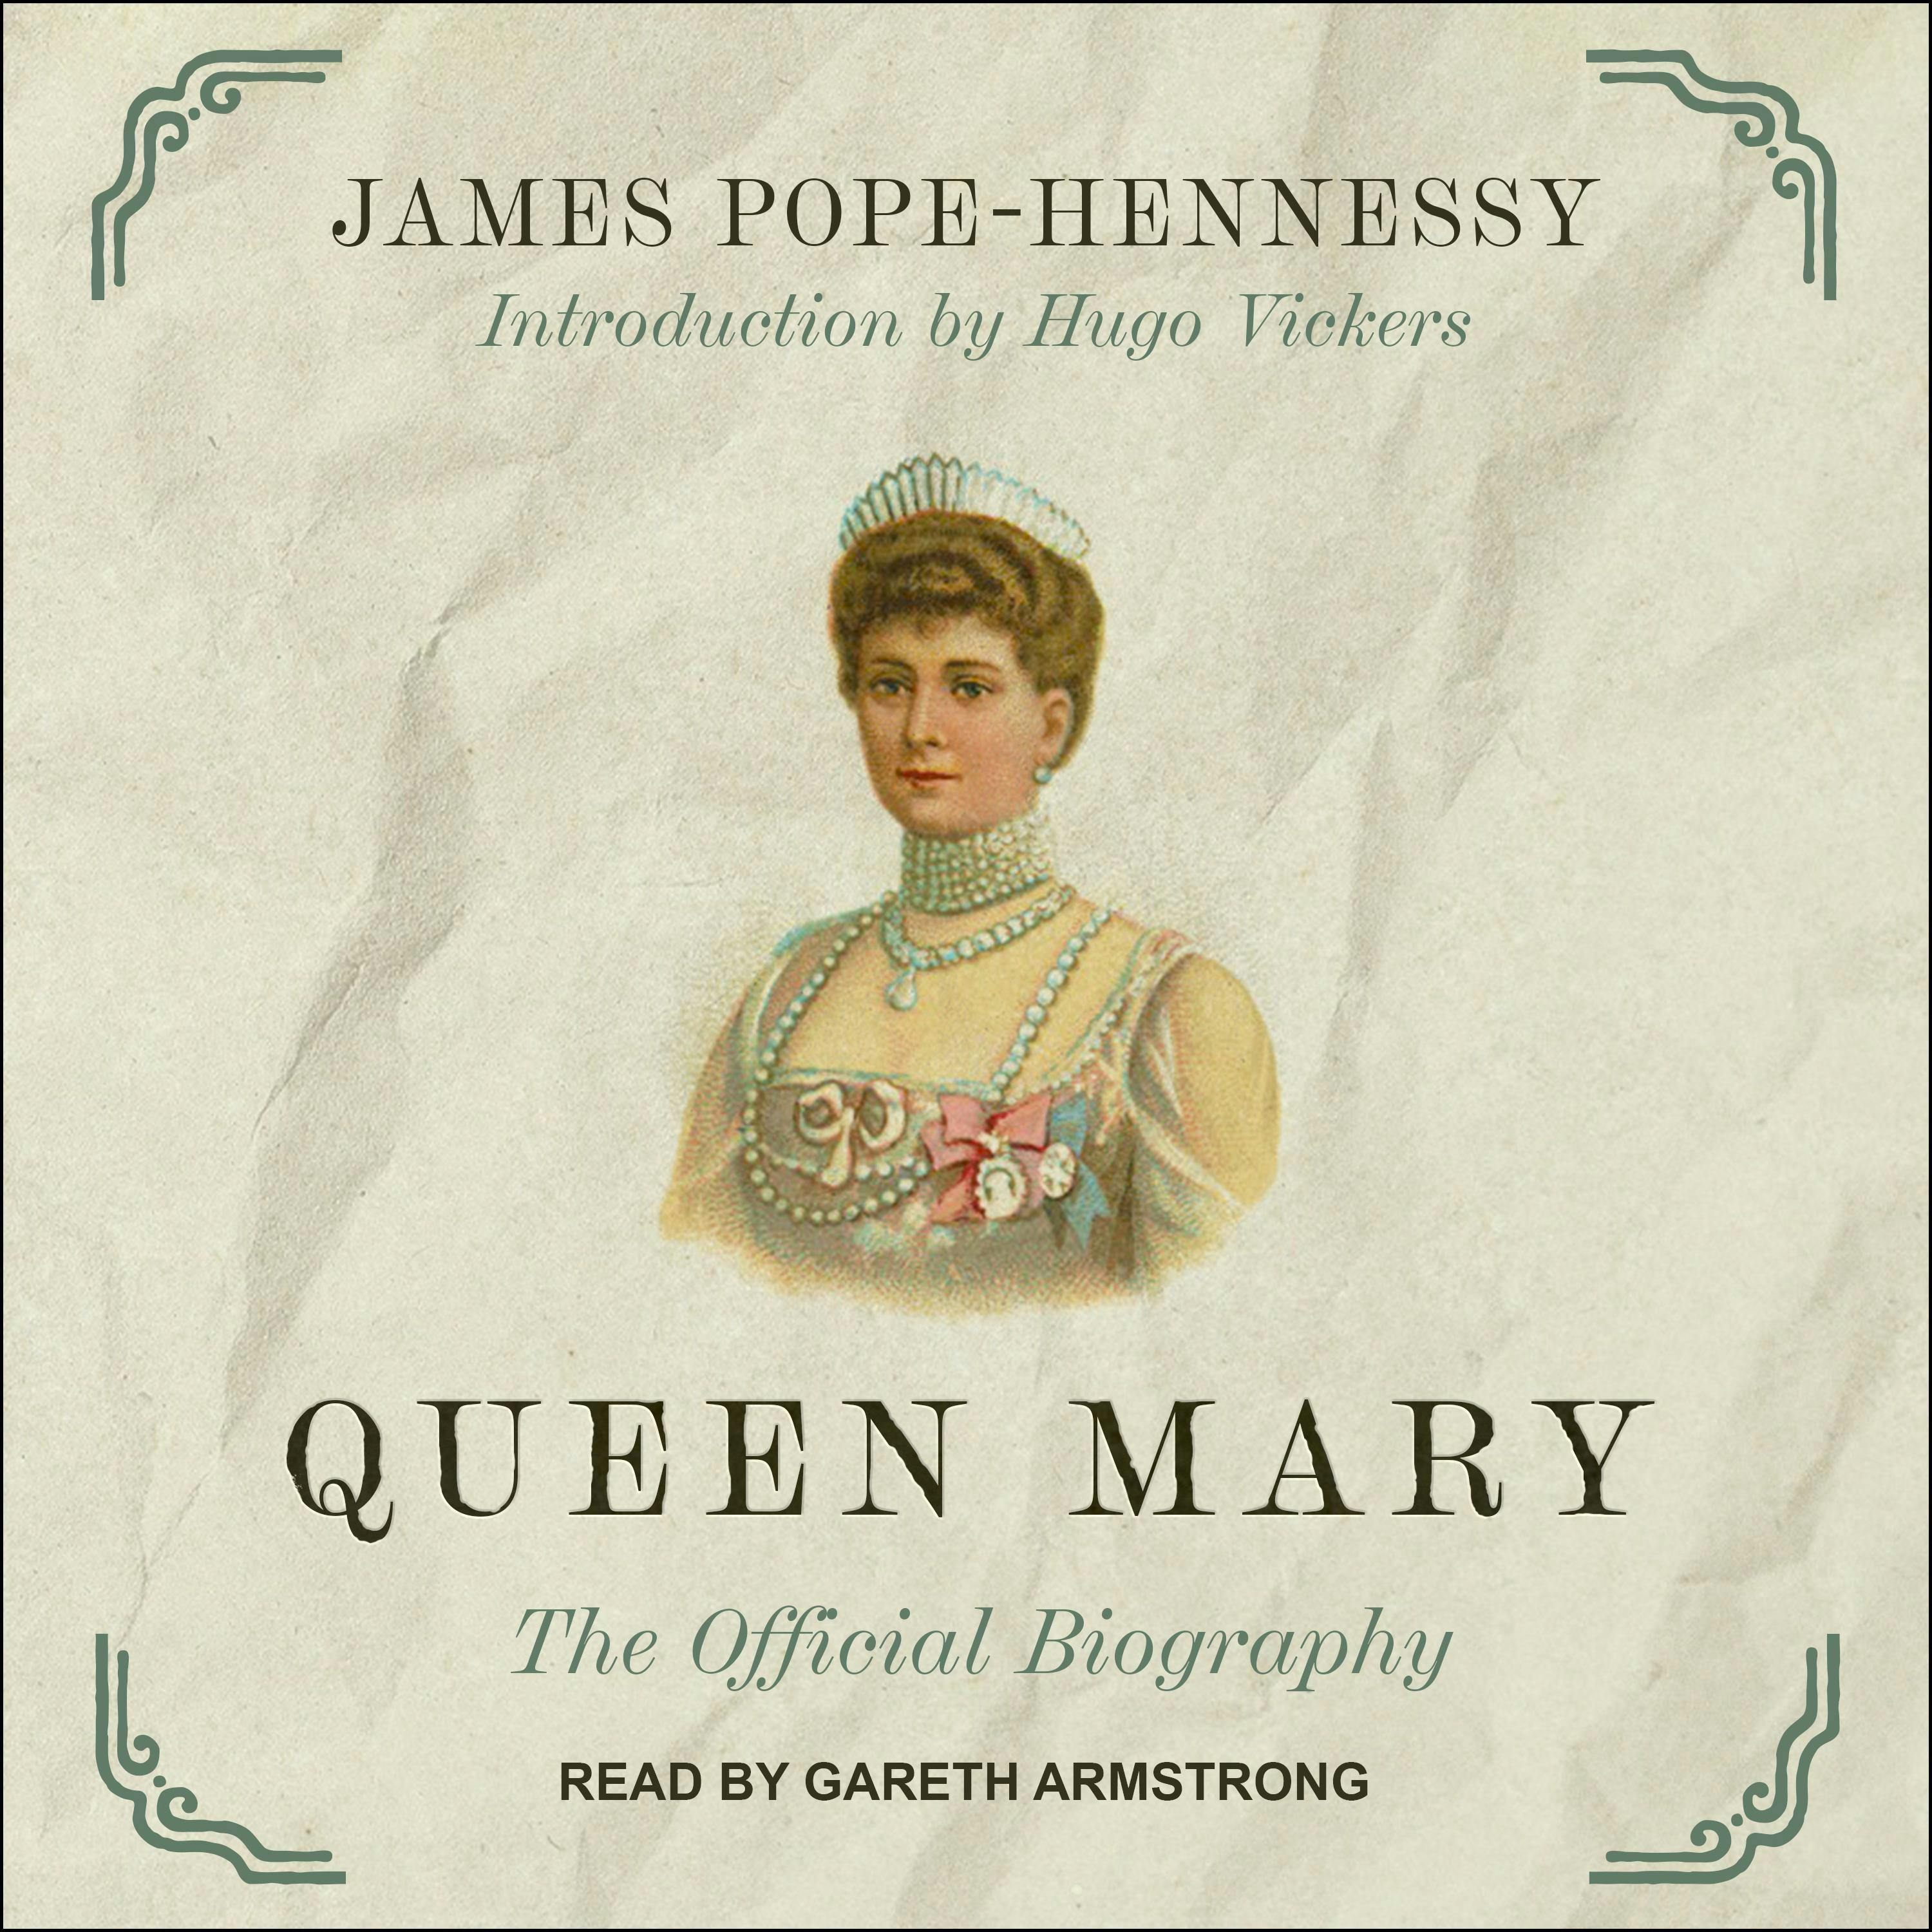 Queen Mary: The Official Biography - Hugo Vickers, James Pope-Hennessy